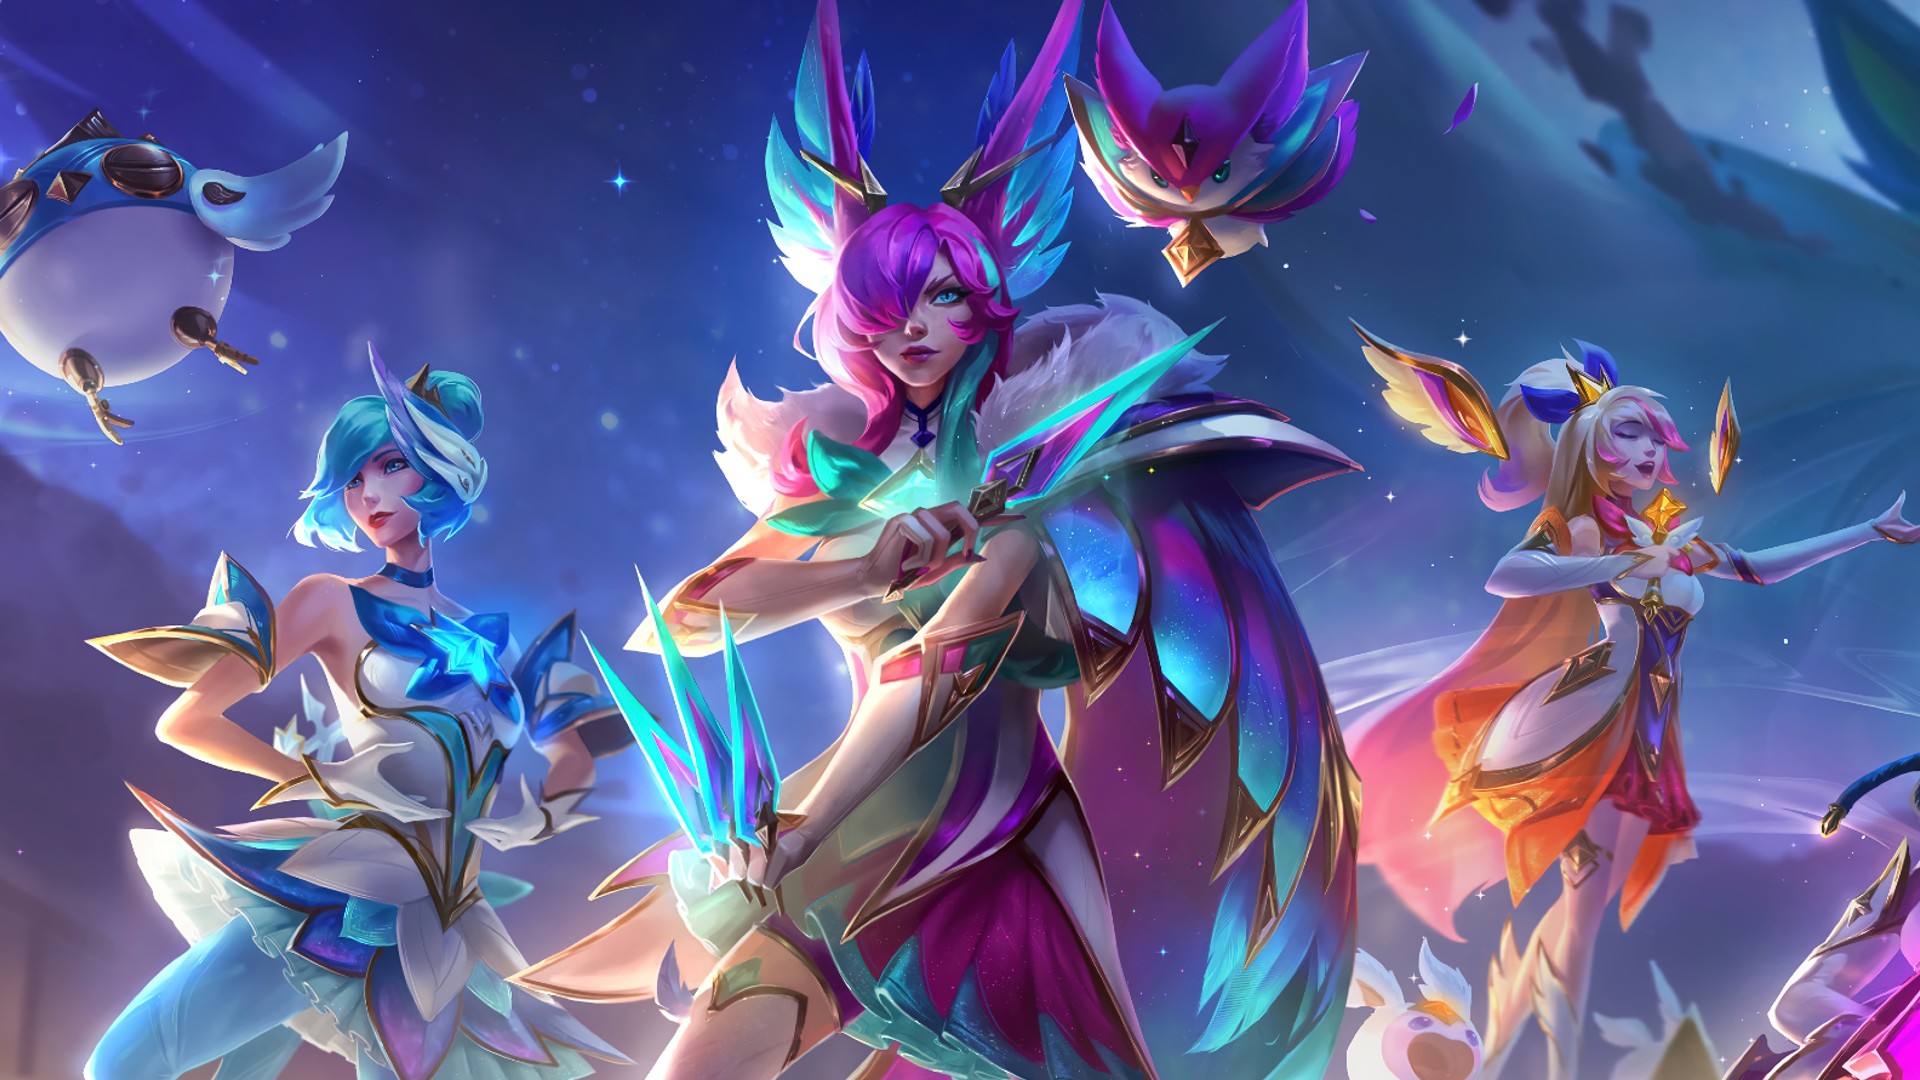 of Legends' new Star Guardian just expensive chromas